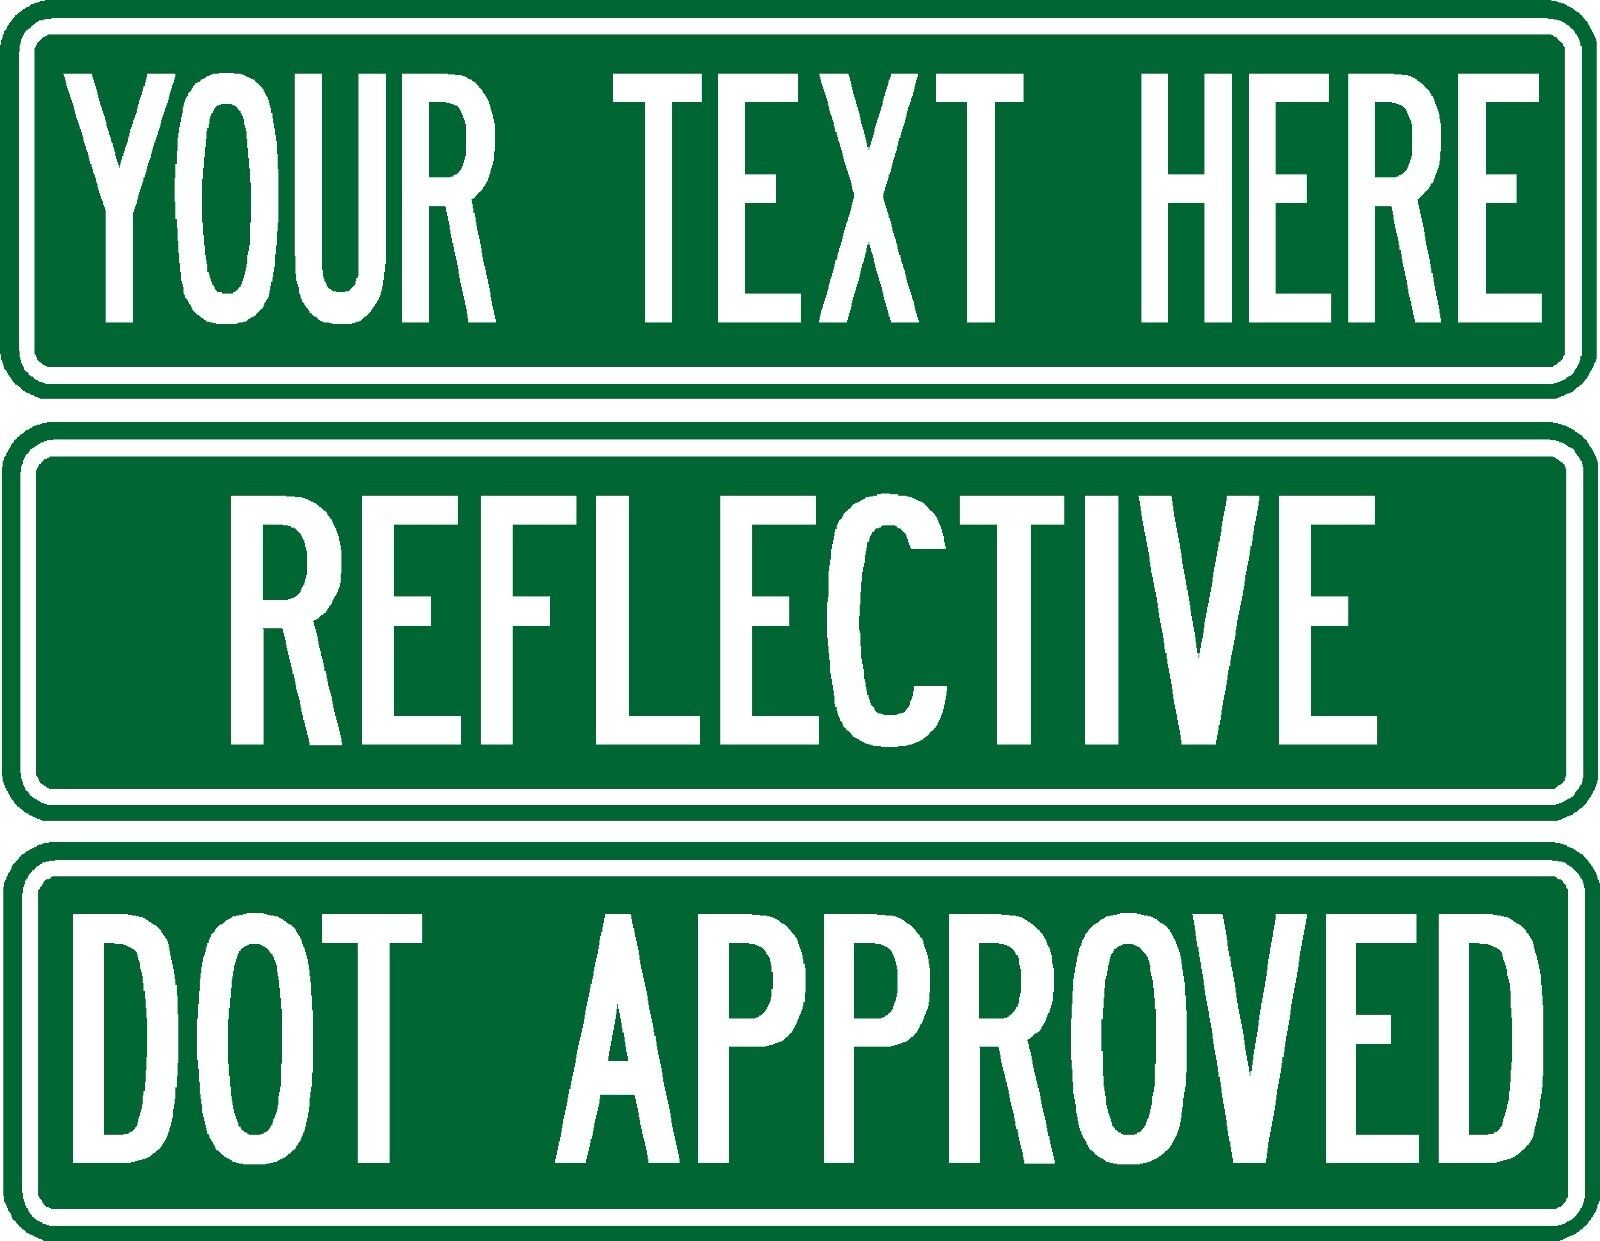 Real custom street sign .080 thick 2-sided REFLECTIVE road sign DOT APPROVED